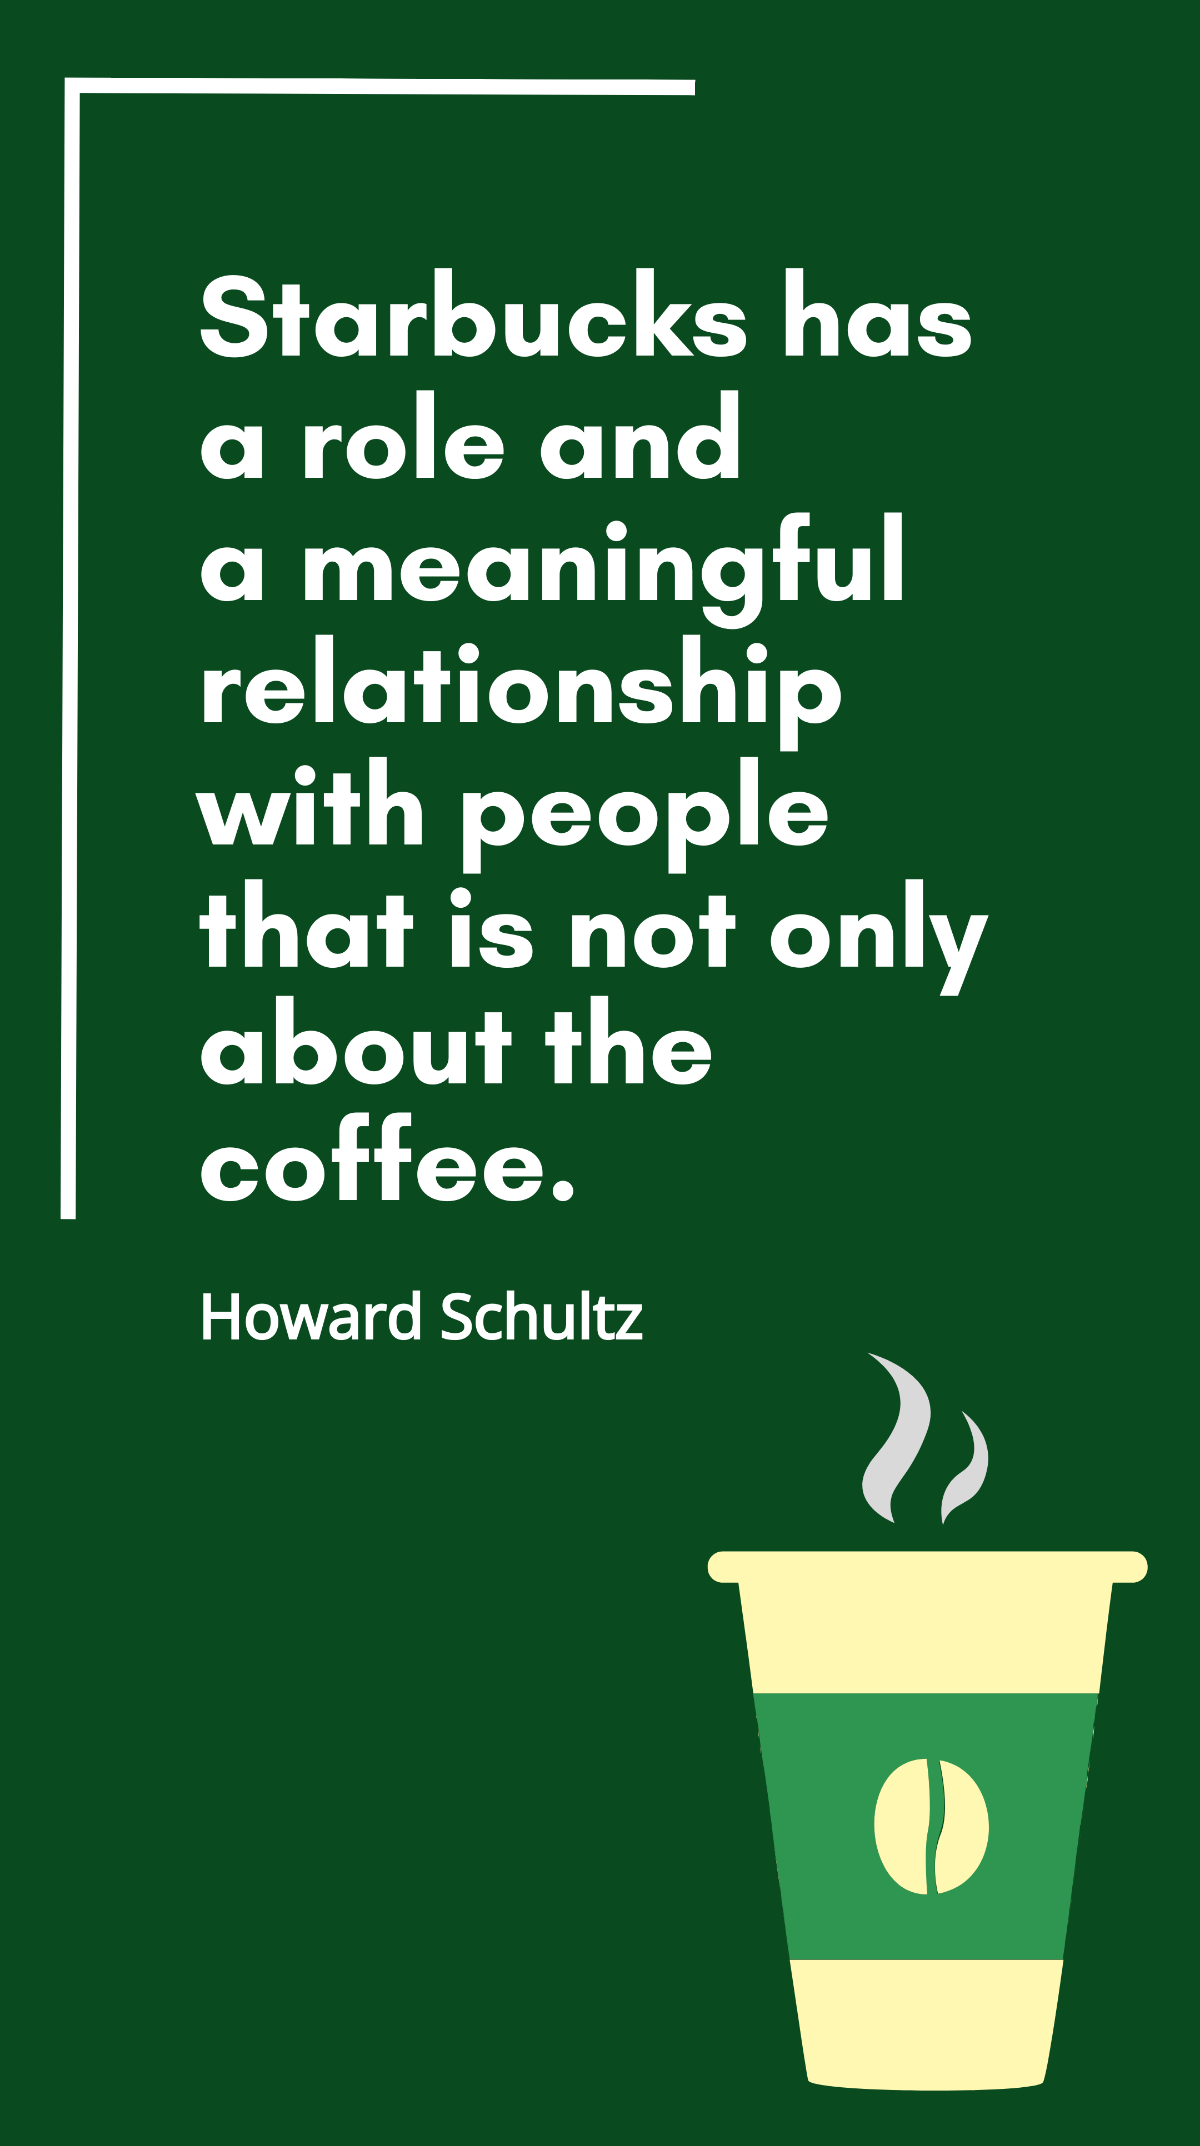 Howard Schultz - Starbucks has a role and a meaningful relationship with people that is not only about the coffee. Template